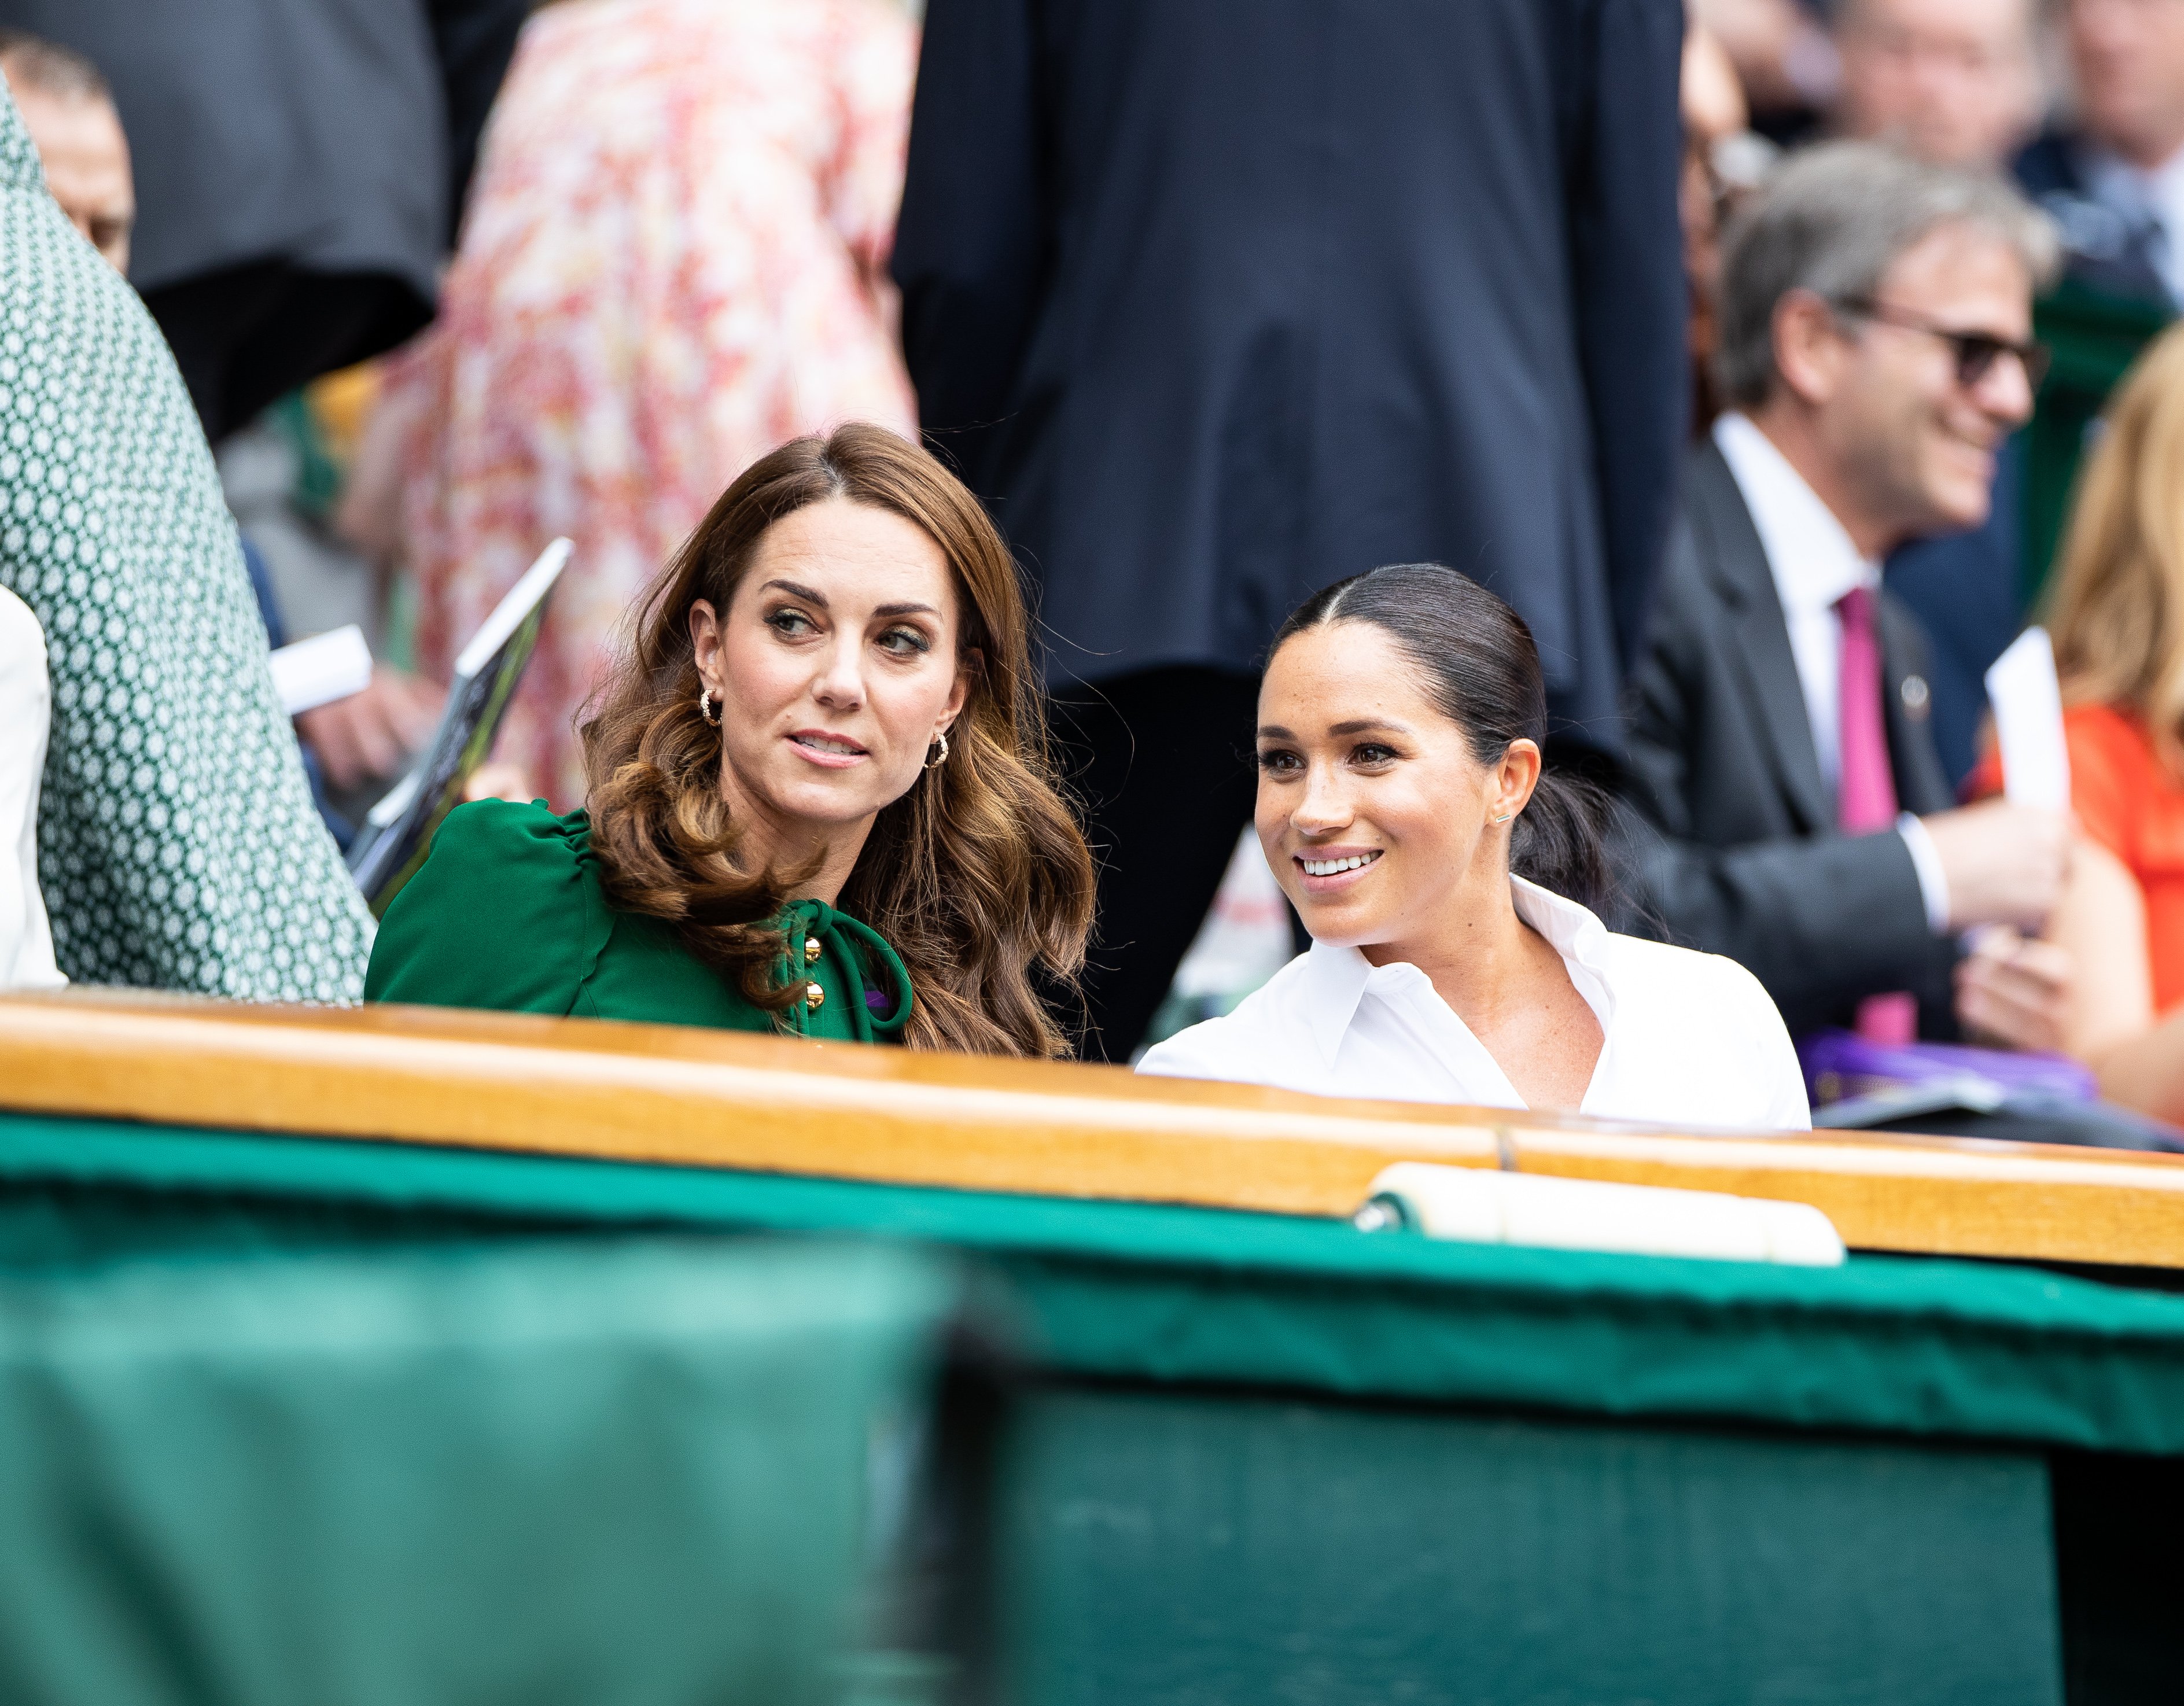 Kate Middleton, Duchess of Cambridge, talks with Meghan Markle, Duchess of Sussex in the royal box before the start of the Women's Singles Final at The Wimbledon Lawn Tennis Championship at the All England Lawn and Tennis Club at Wimbledon on July 13, 2019 in London, England | Photo: Getty Images